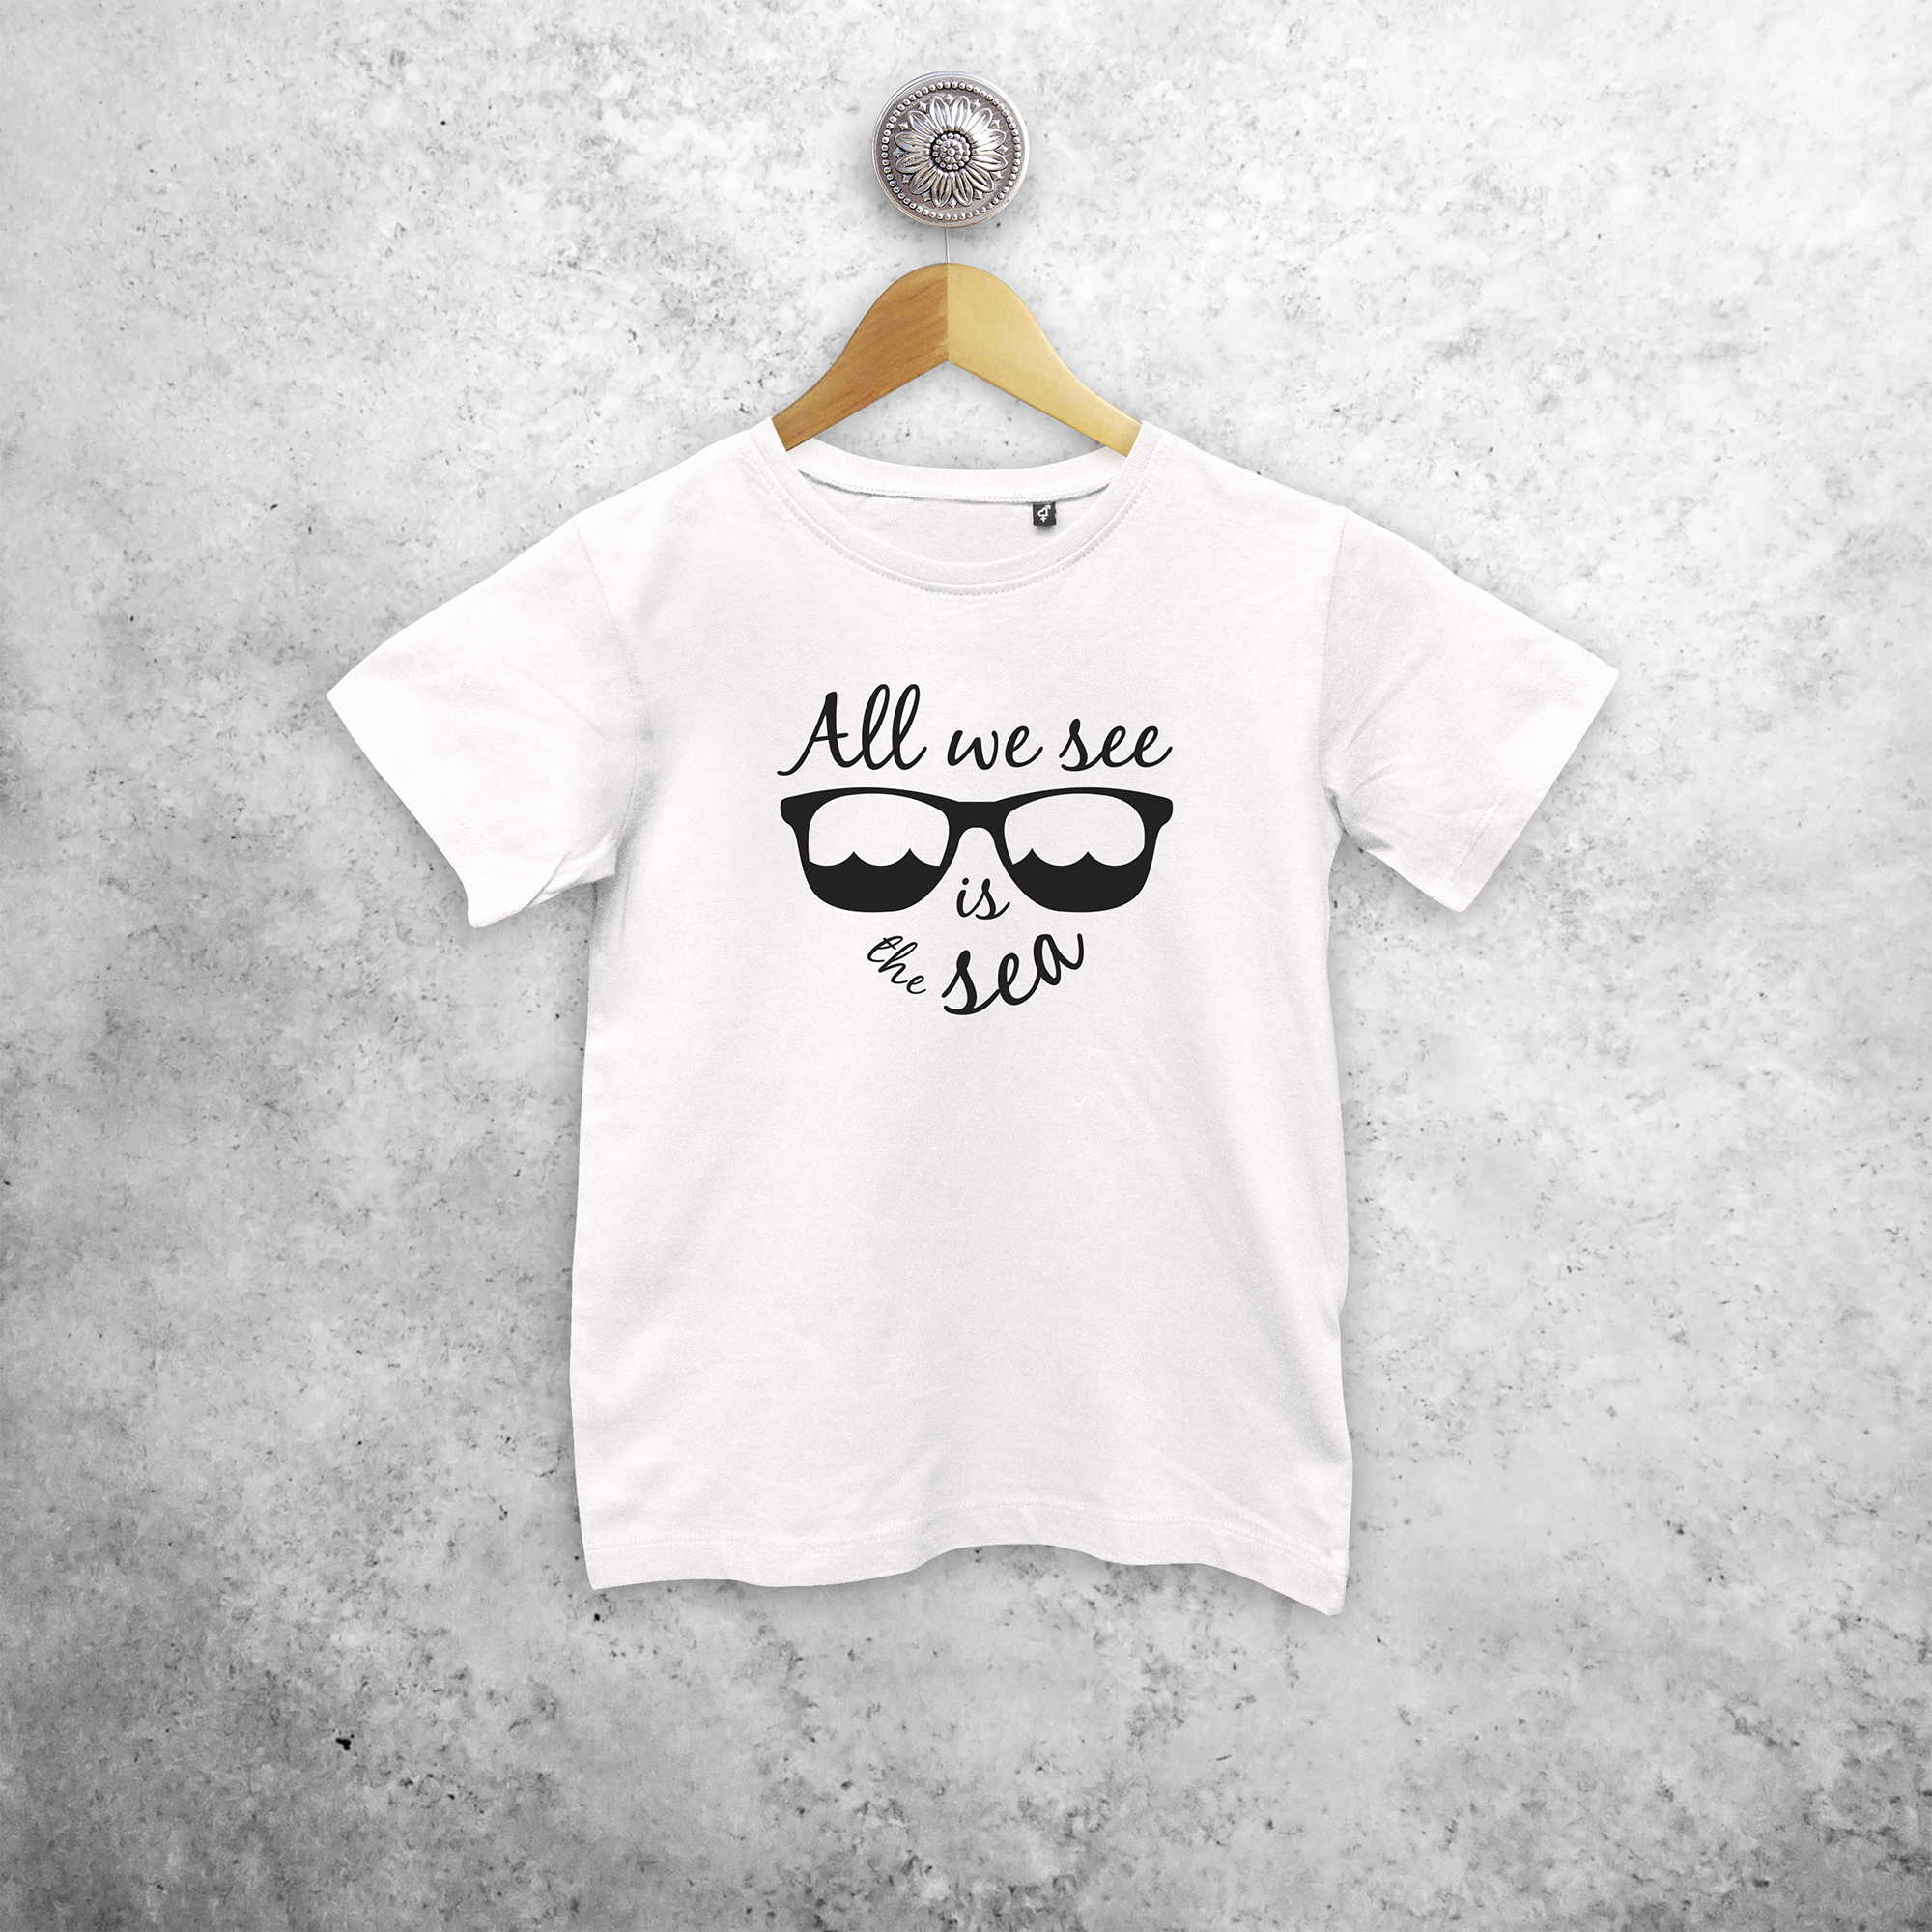 'All we see is the sea' kids shortsleeve shirt